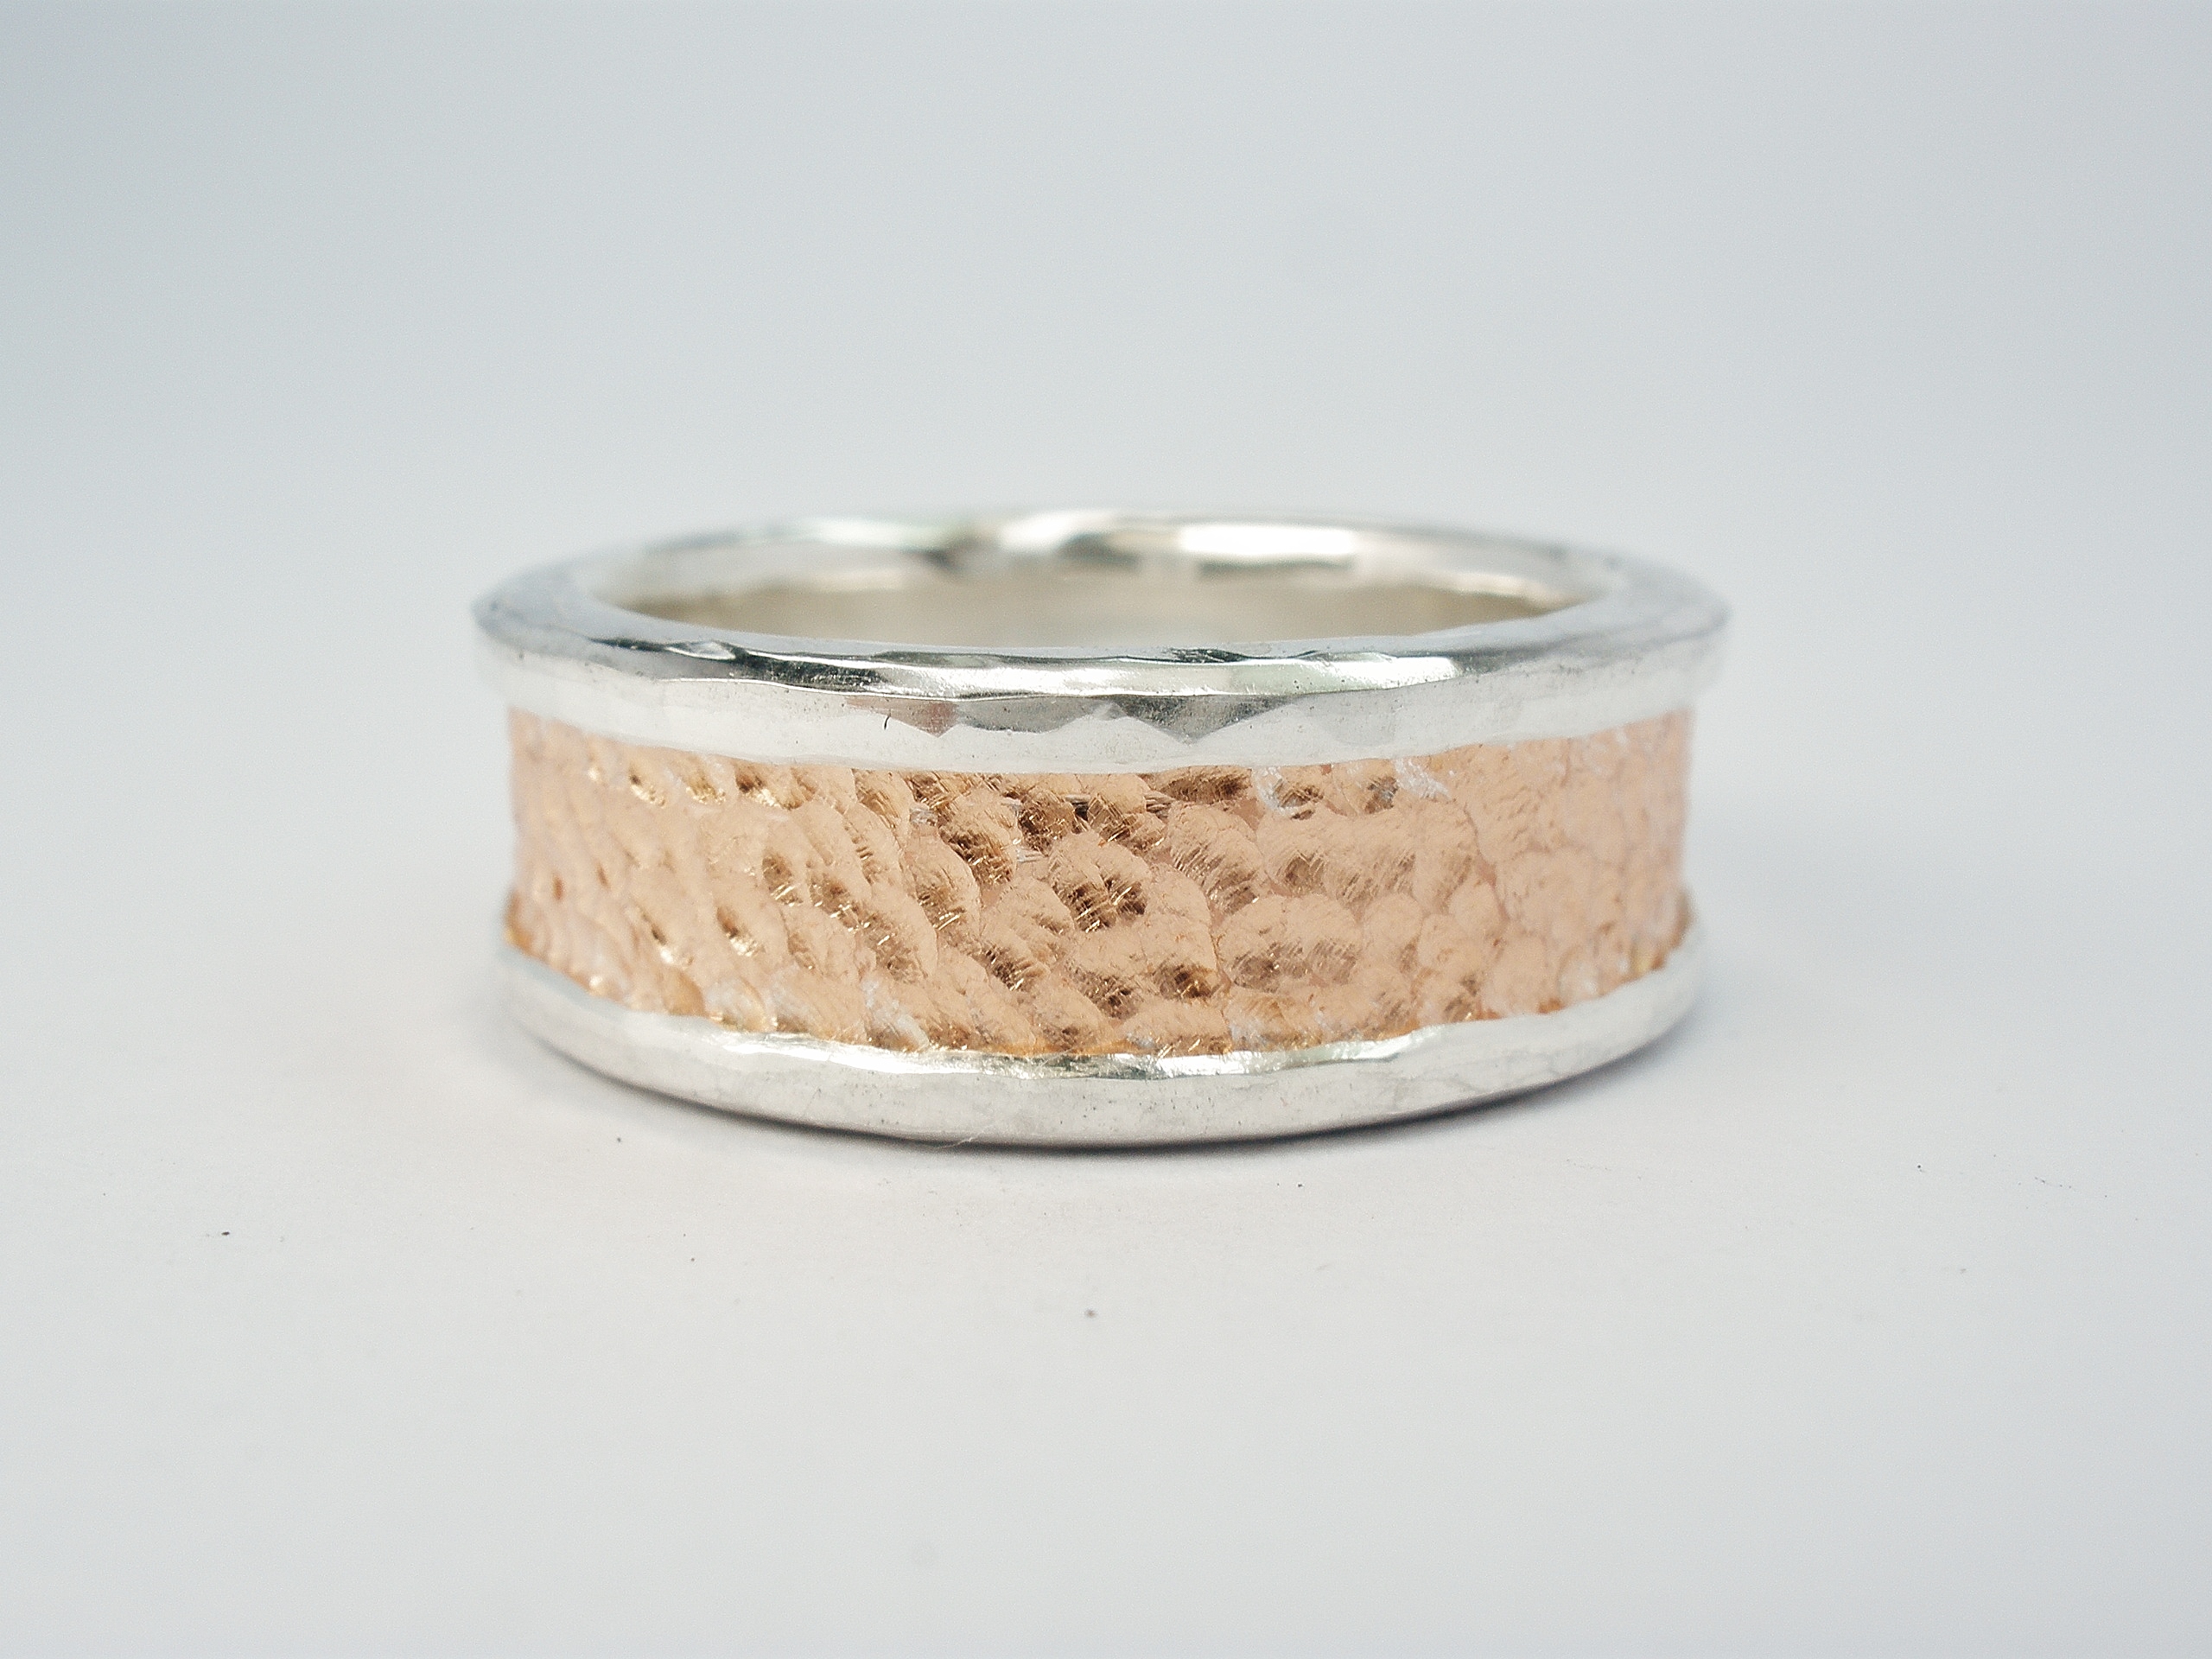 9ct rose gold (also known as red gold or pink gold) & palladium hammer finished gents wedding ring. The centre rose gold a rough texture, the wrap-over palladium edges polished.